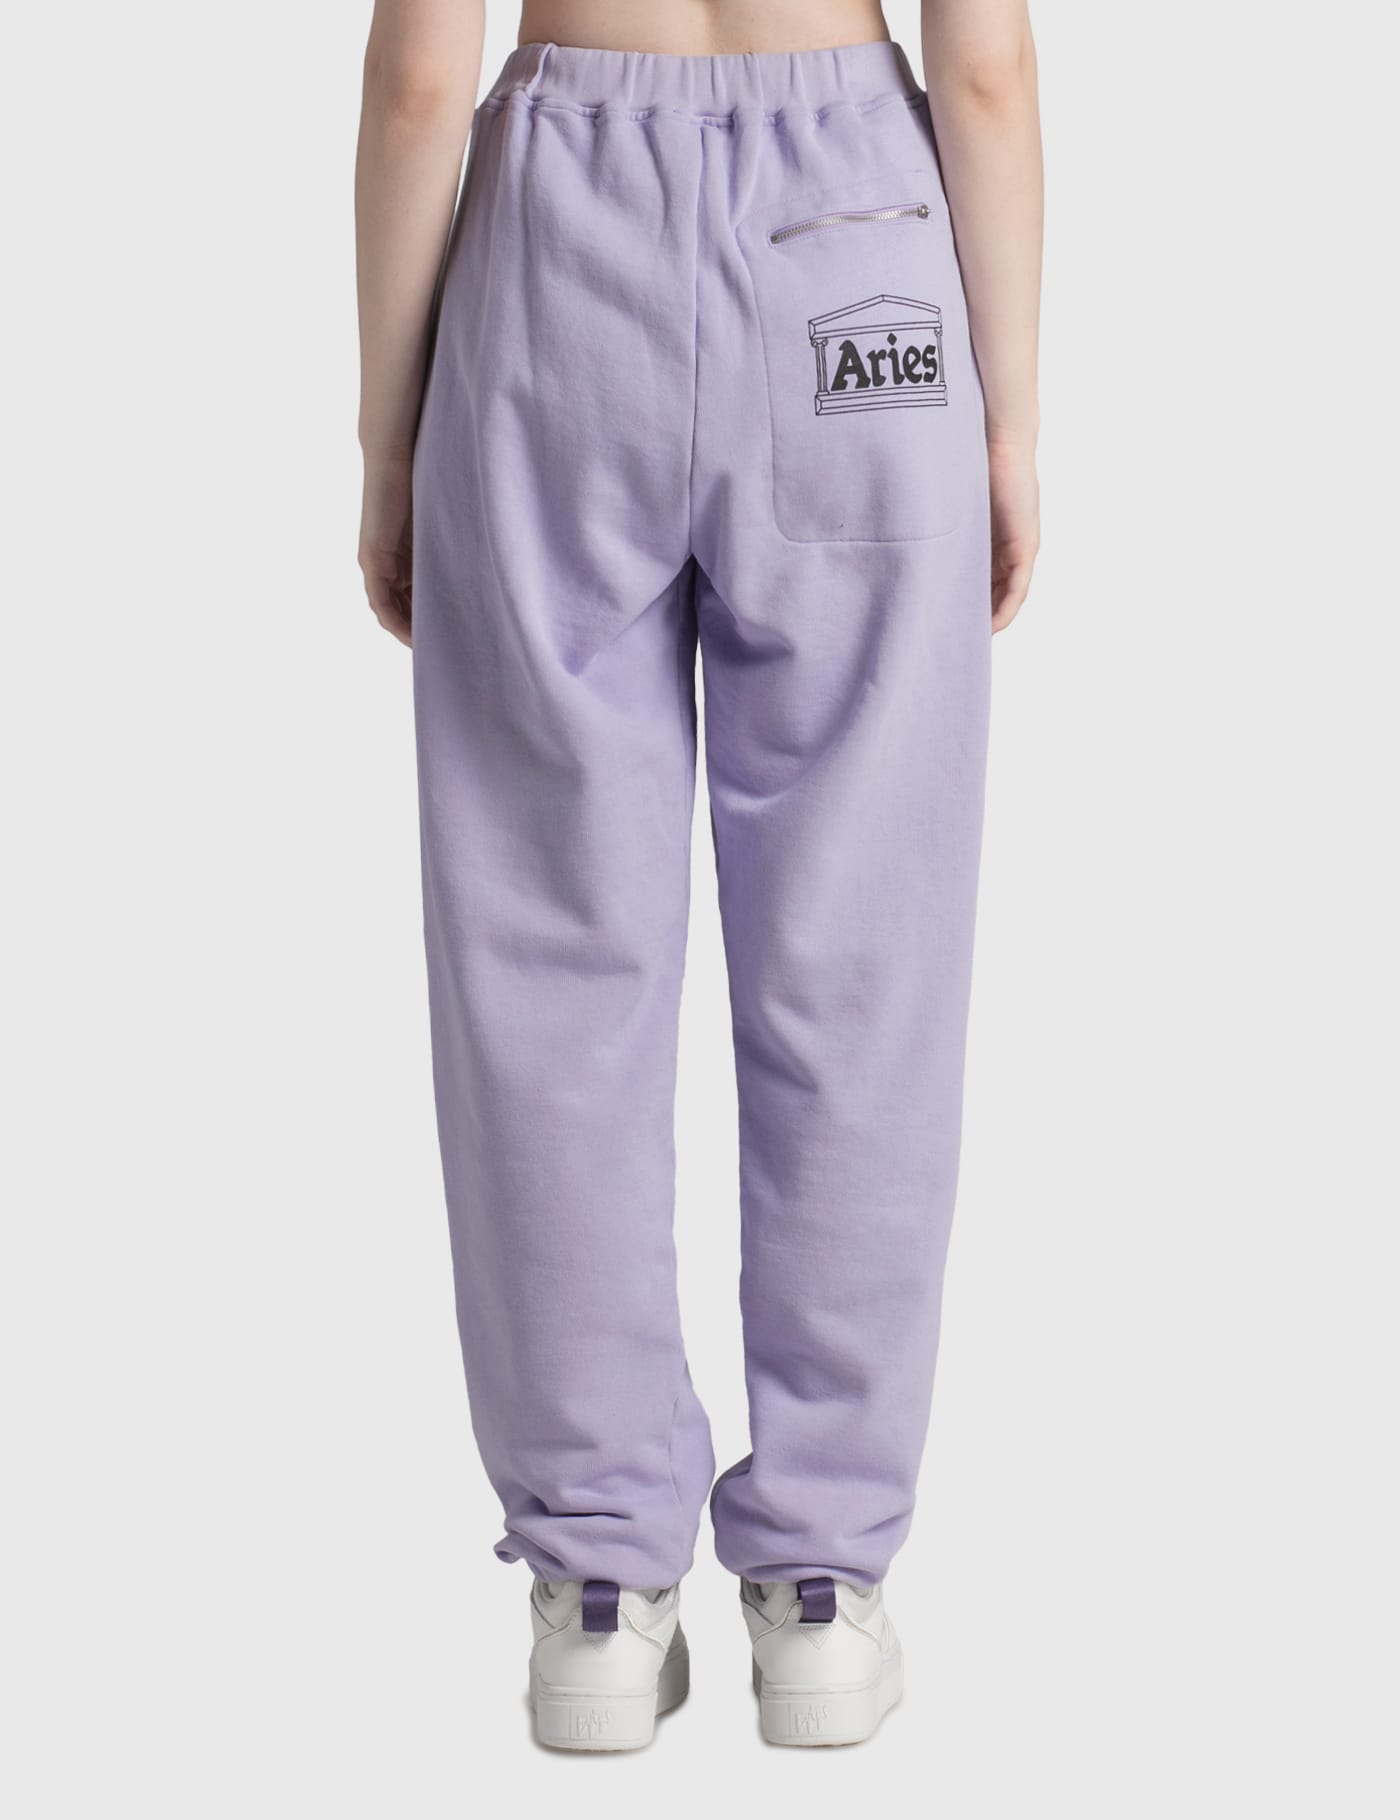 Aries - Premium Temple Sweatpants | HBX - Globally Curated Fashion